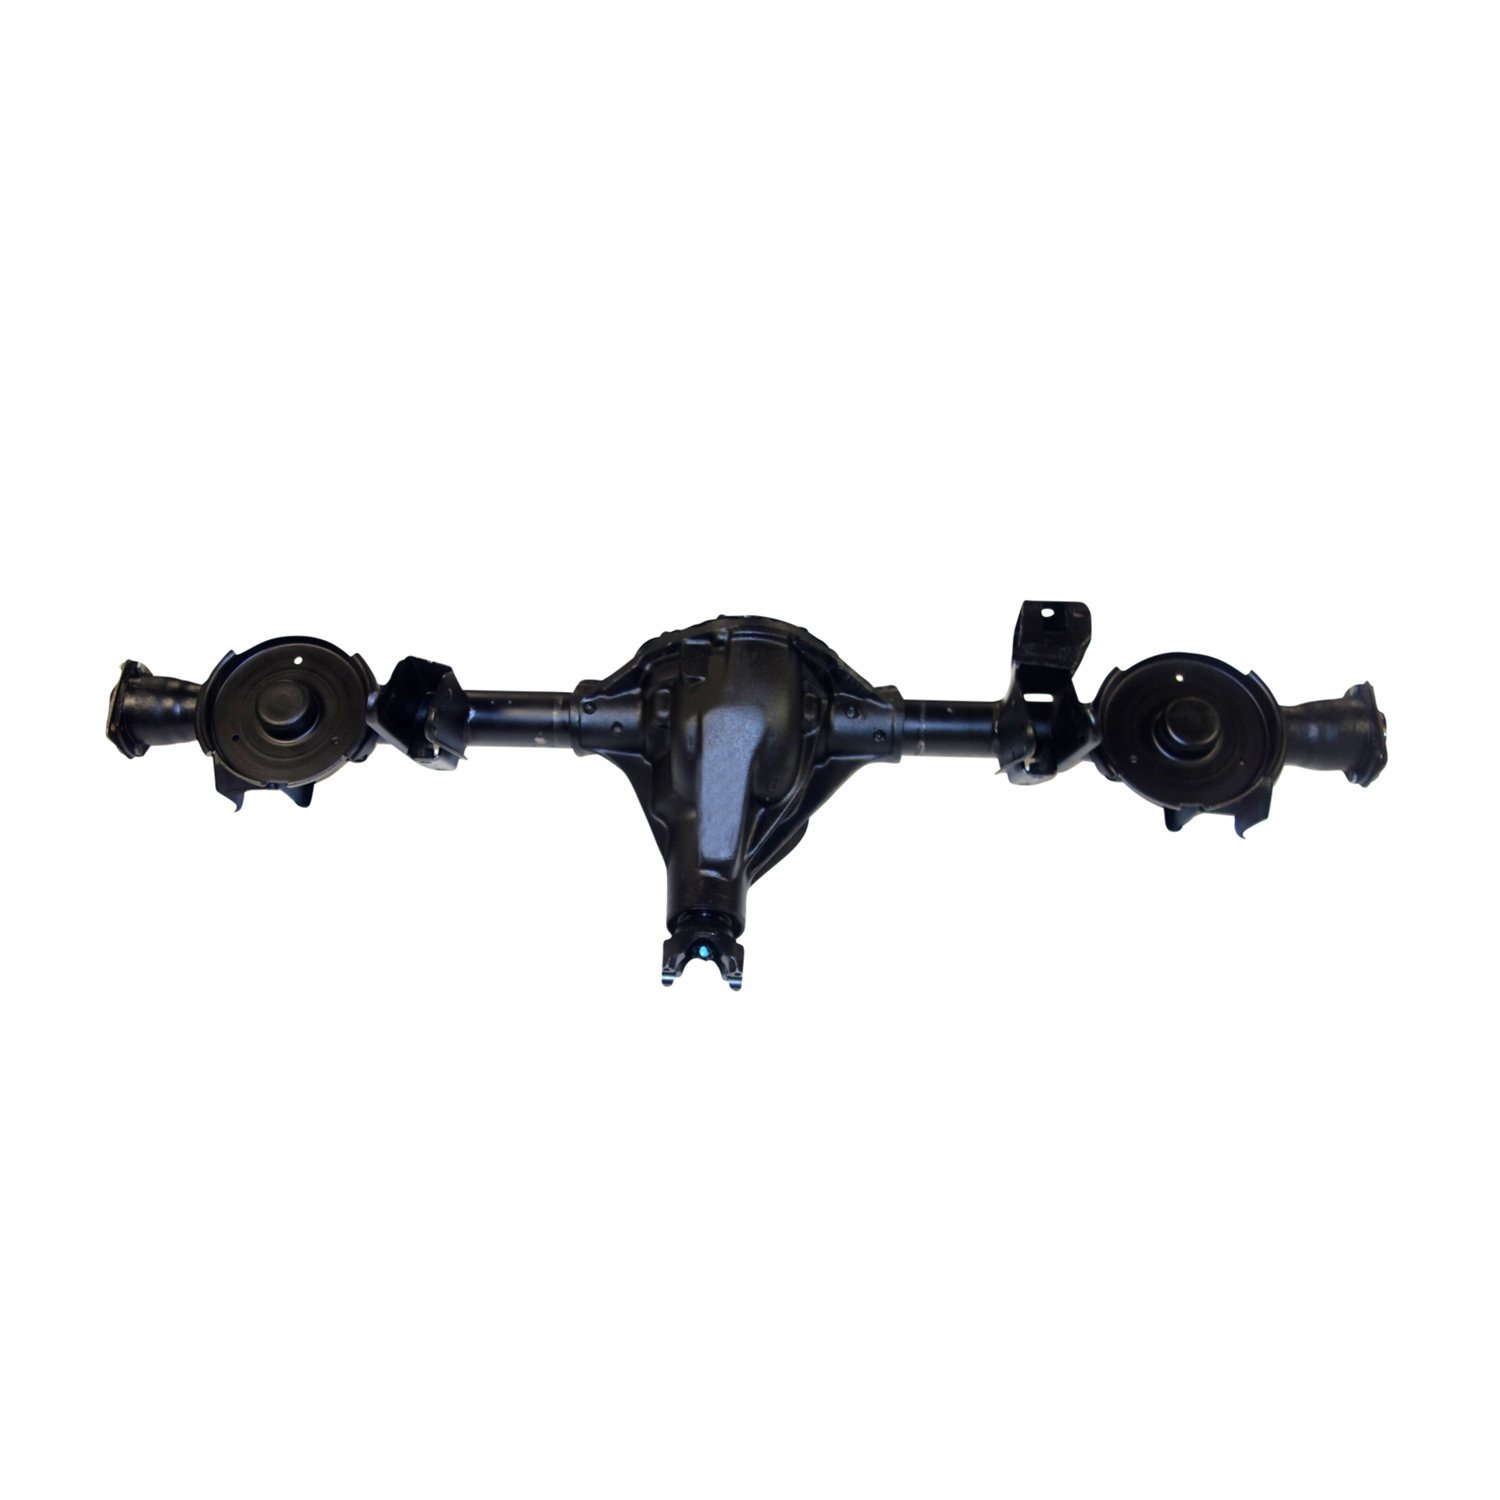 Remanufactured Complete Axle Assy for Dana 44 07-15 Wrangler 4.11 with Electric Locker